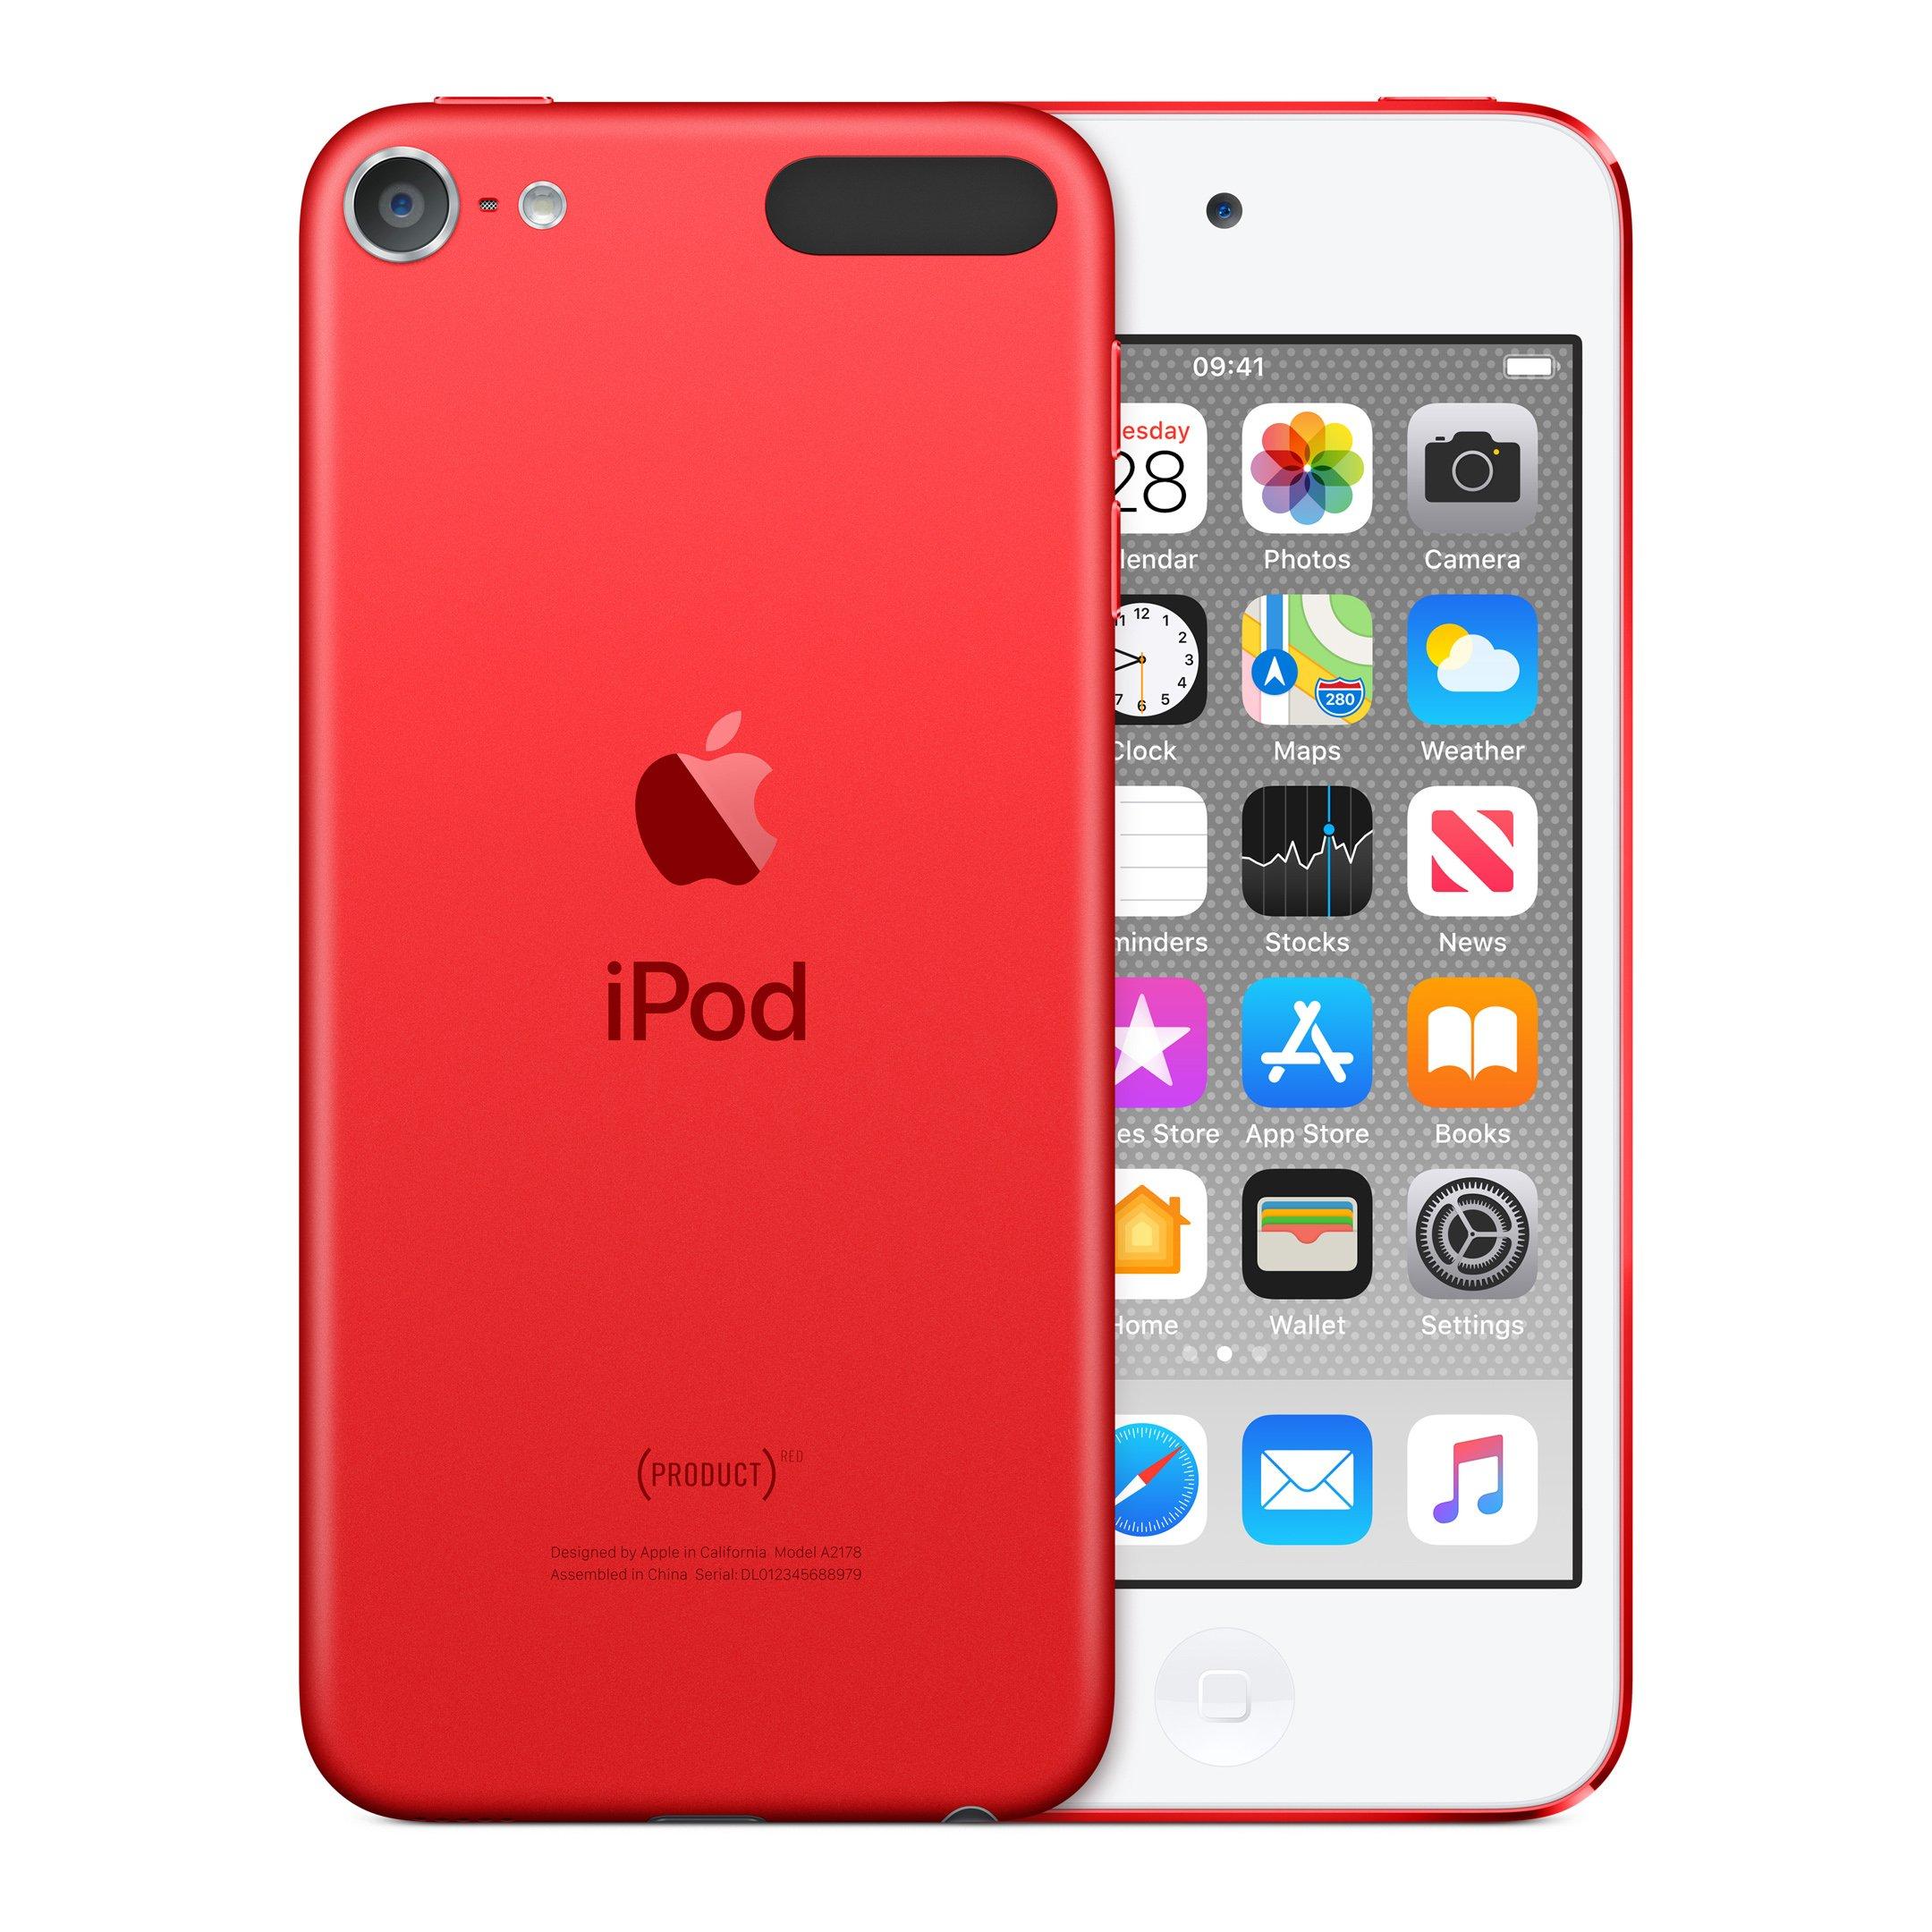 Apple iPod touch 32GB, PRODUCT(RED) - eXtra Saudi